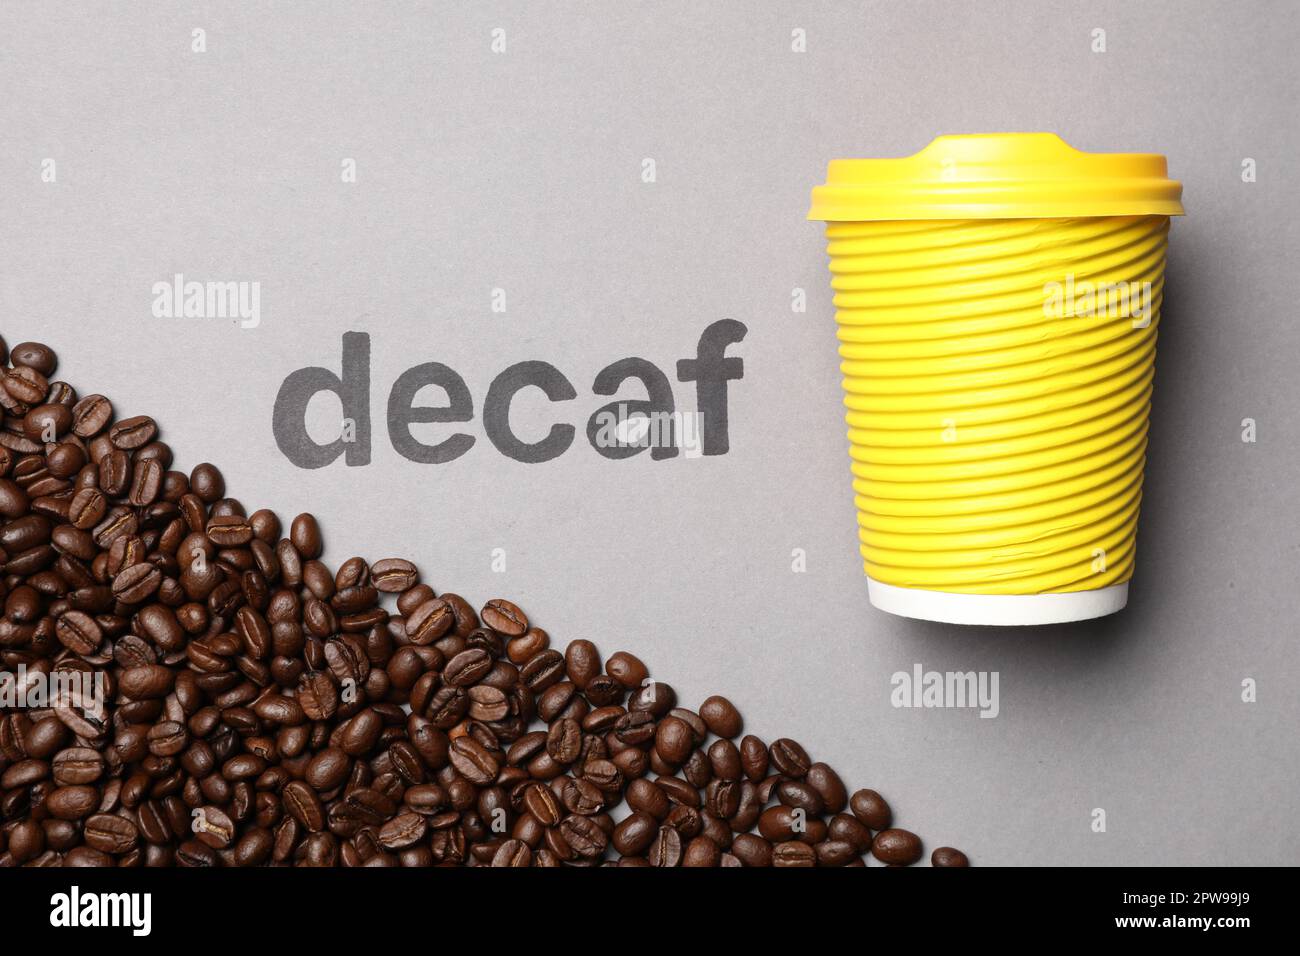 Word Decaf, coffee beans and takeaway paper cup on light grey background, flat lay Stock Photo